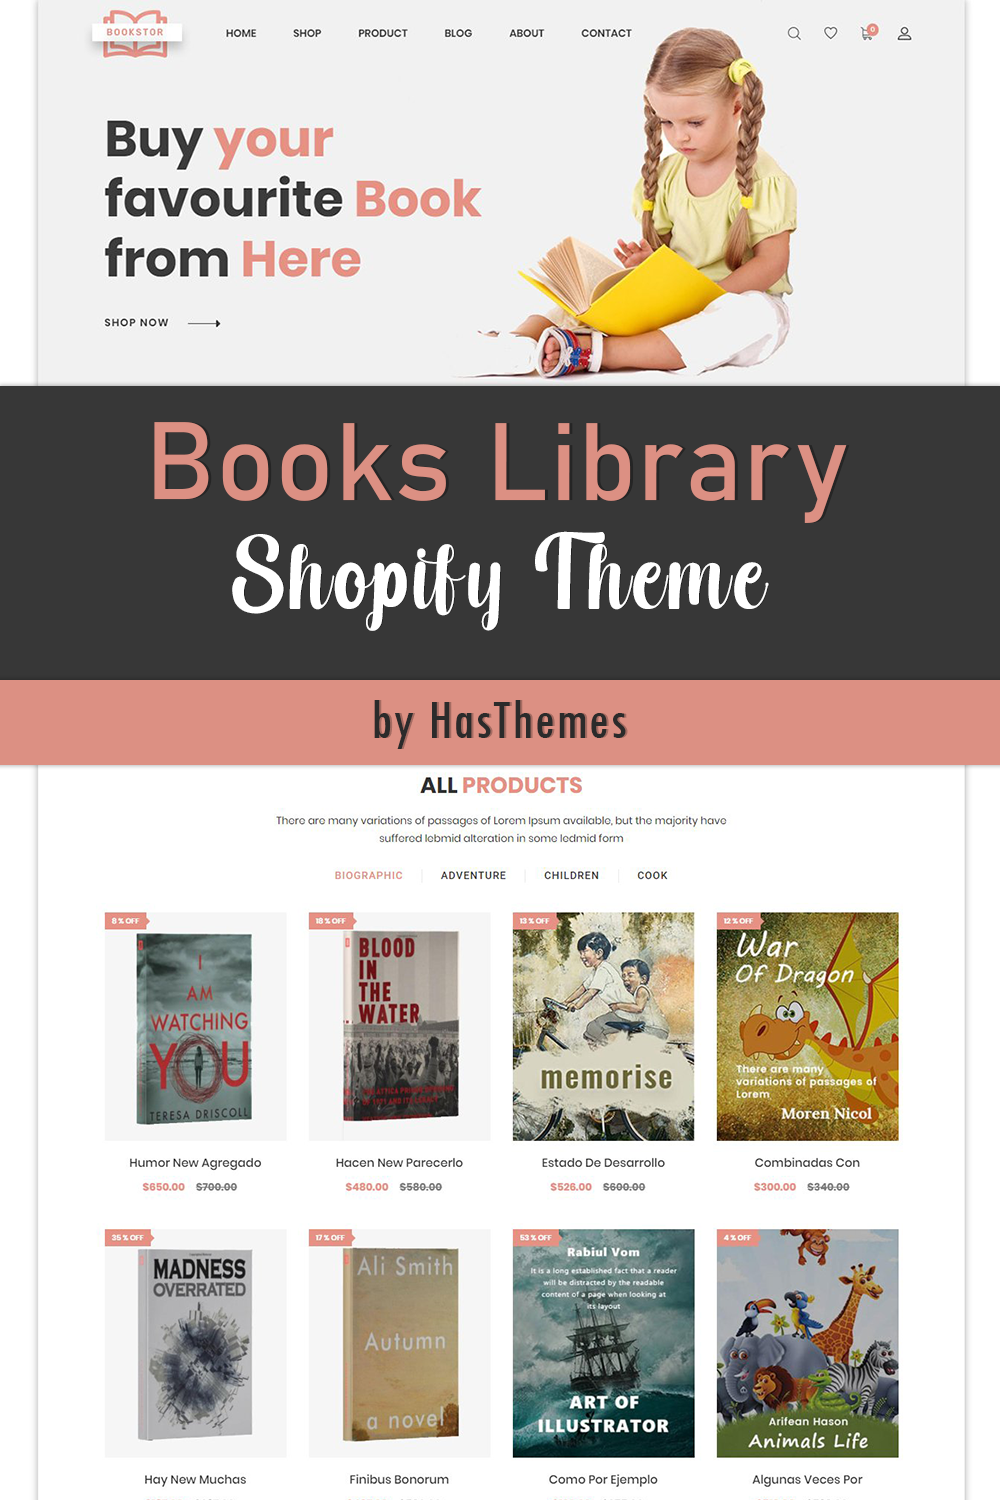 Books library shopify theme of pinterest.